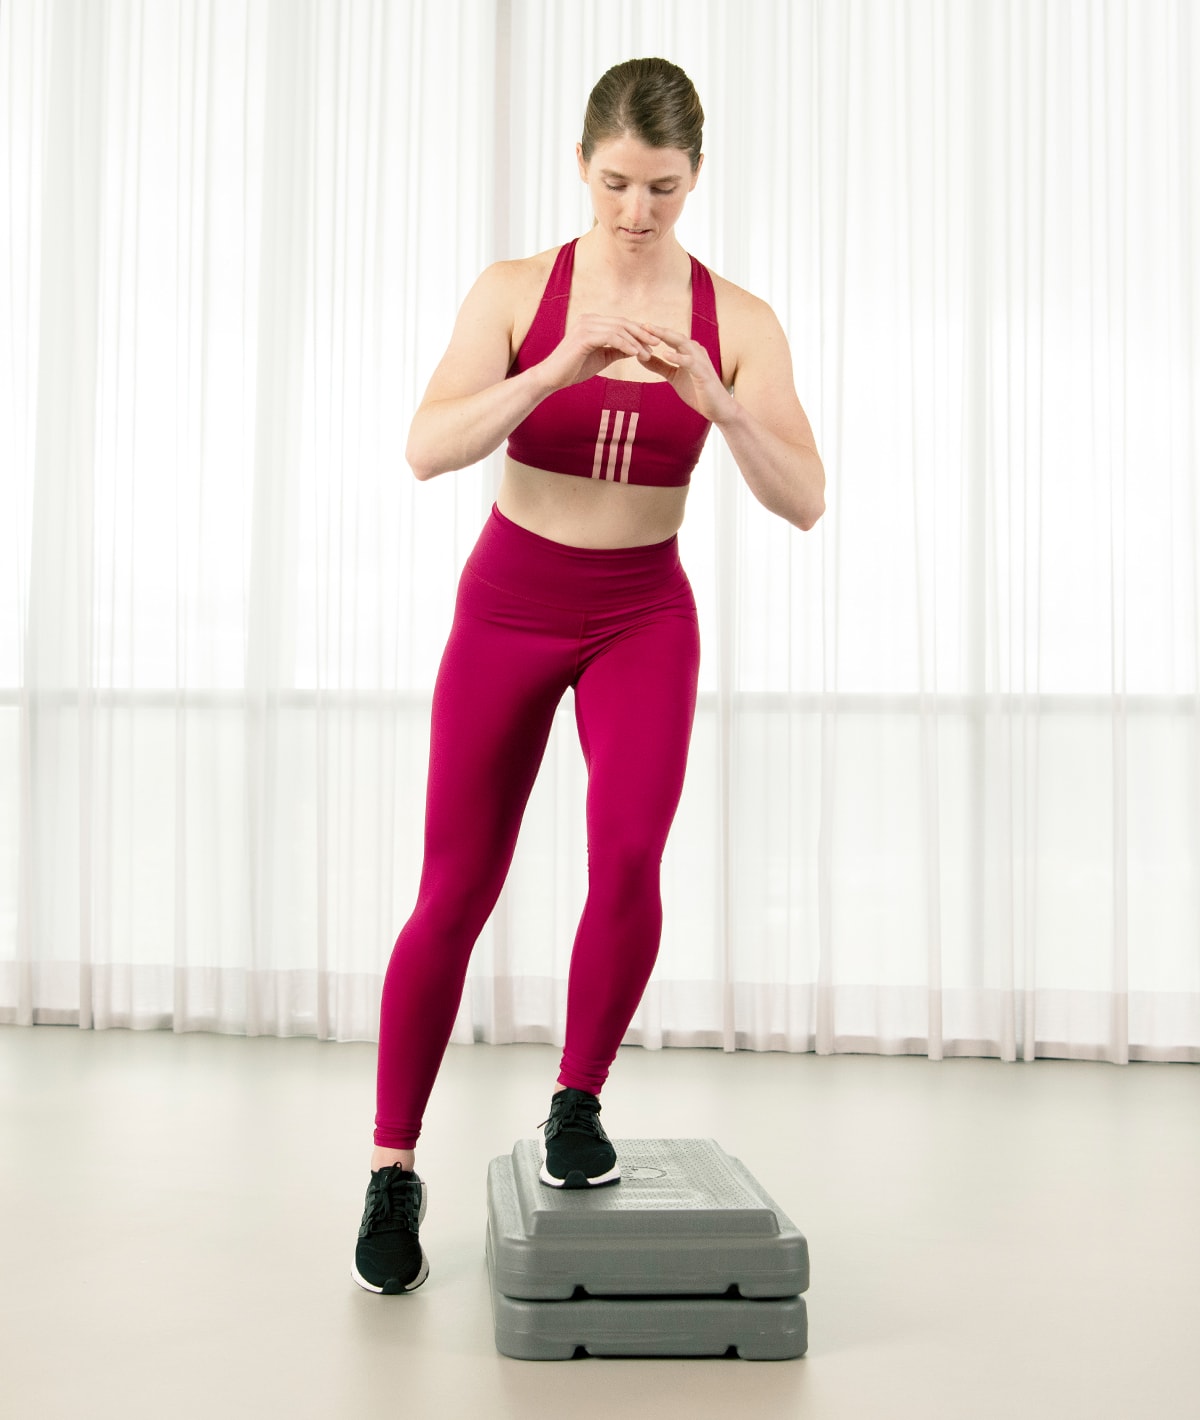 Balance Exercises: Moves to Improve Stability and Prevent Injury - PureWow